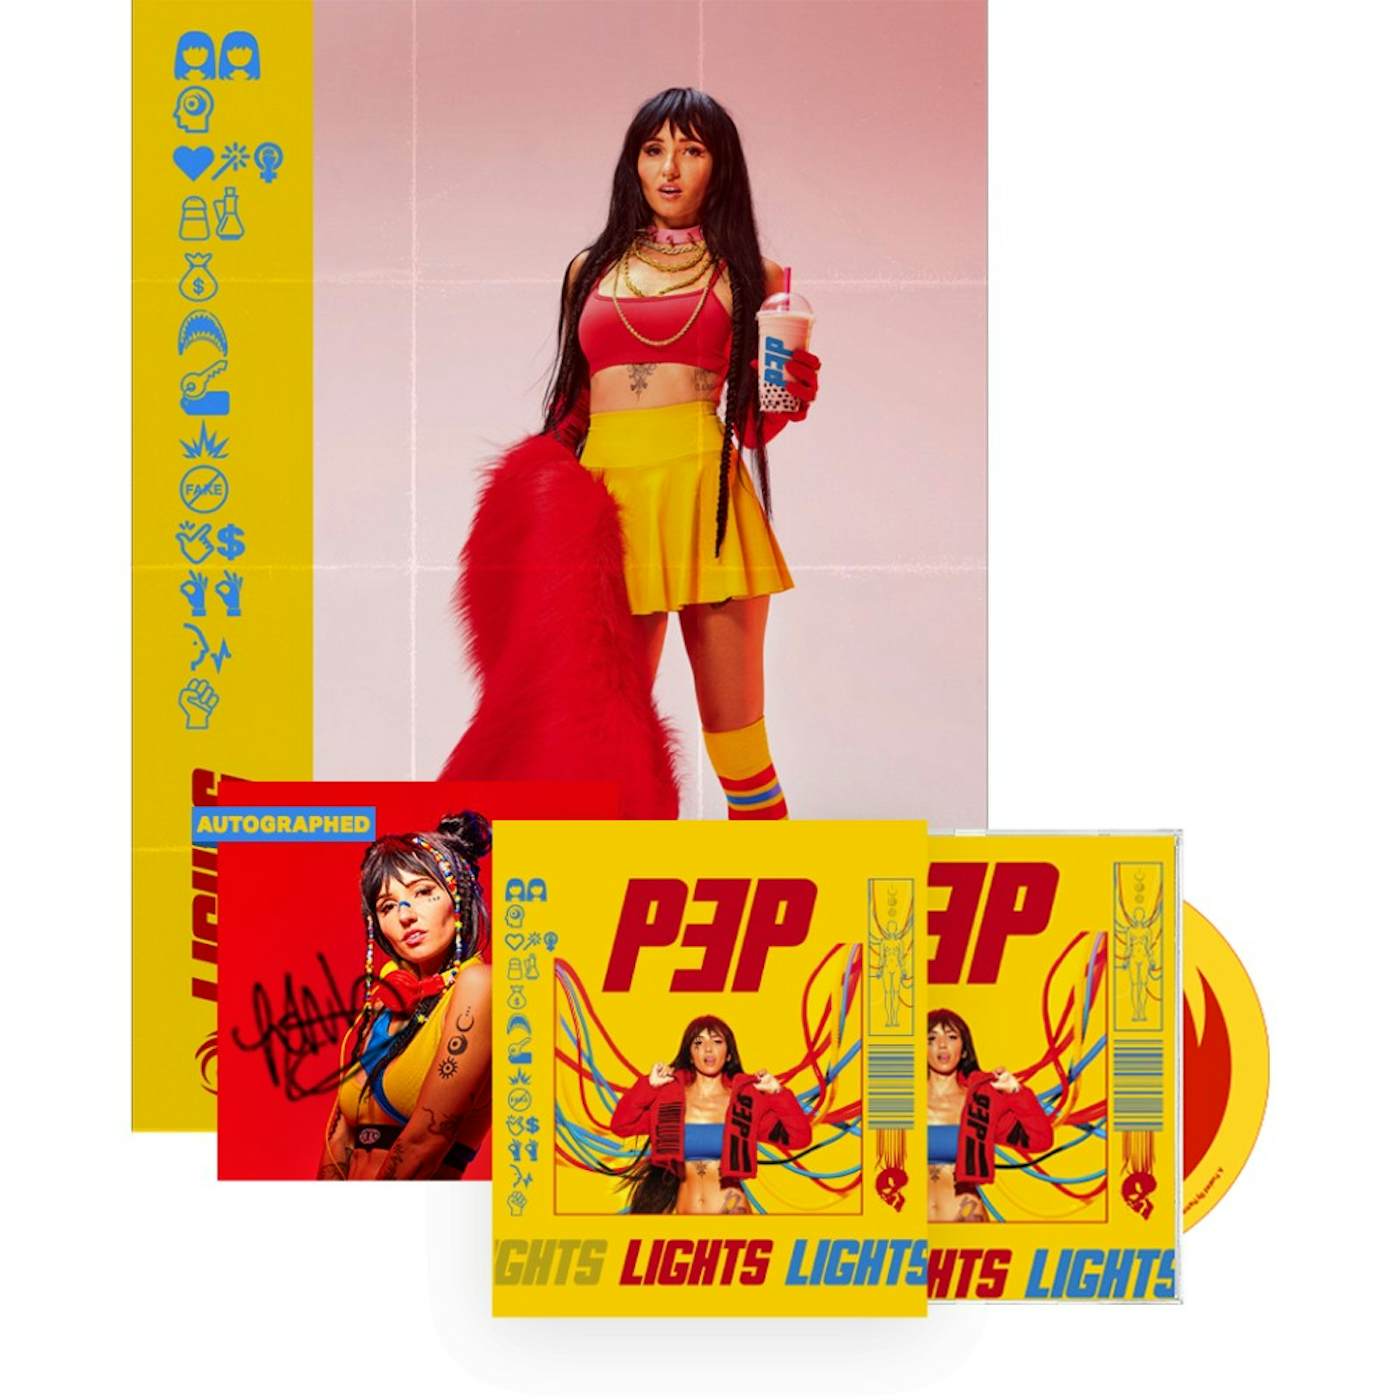 Lights PEP CD with Autographed Art Card and Poster